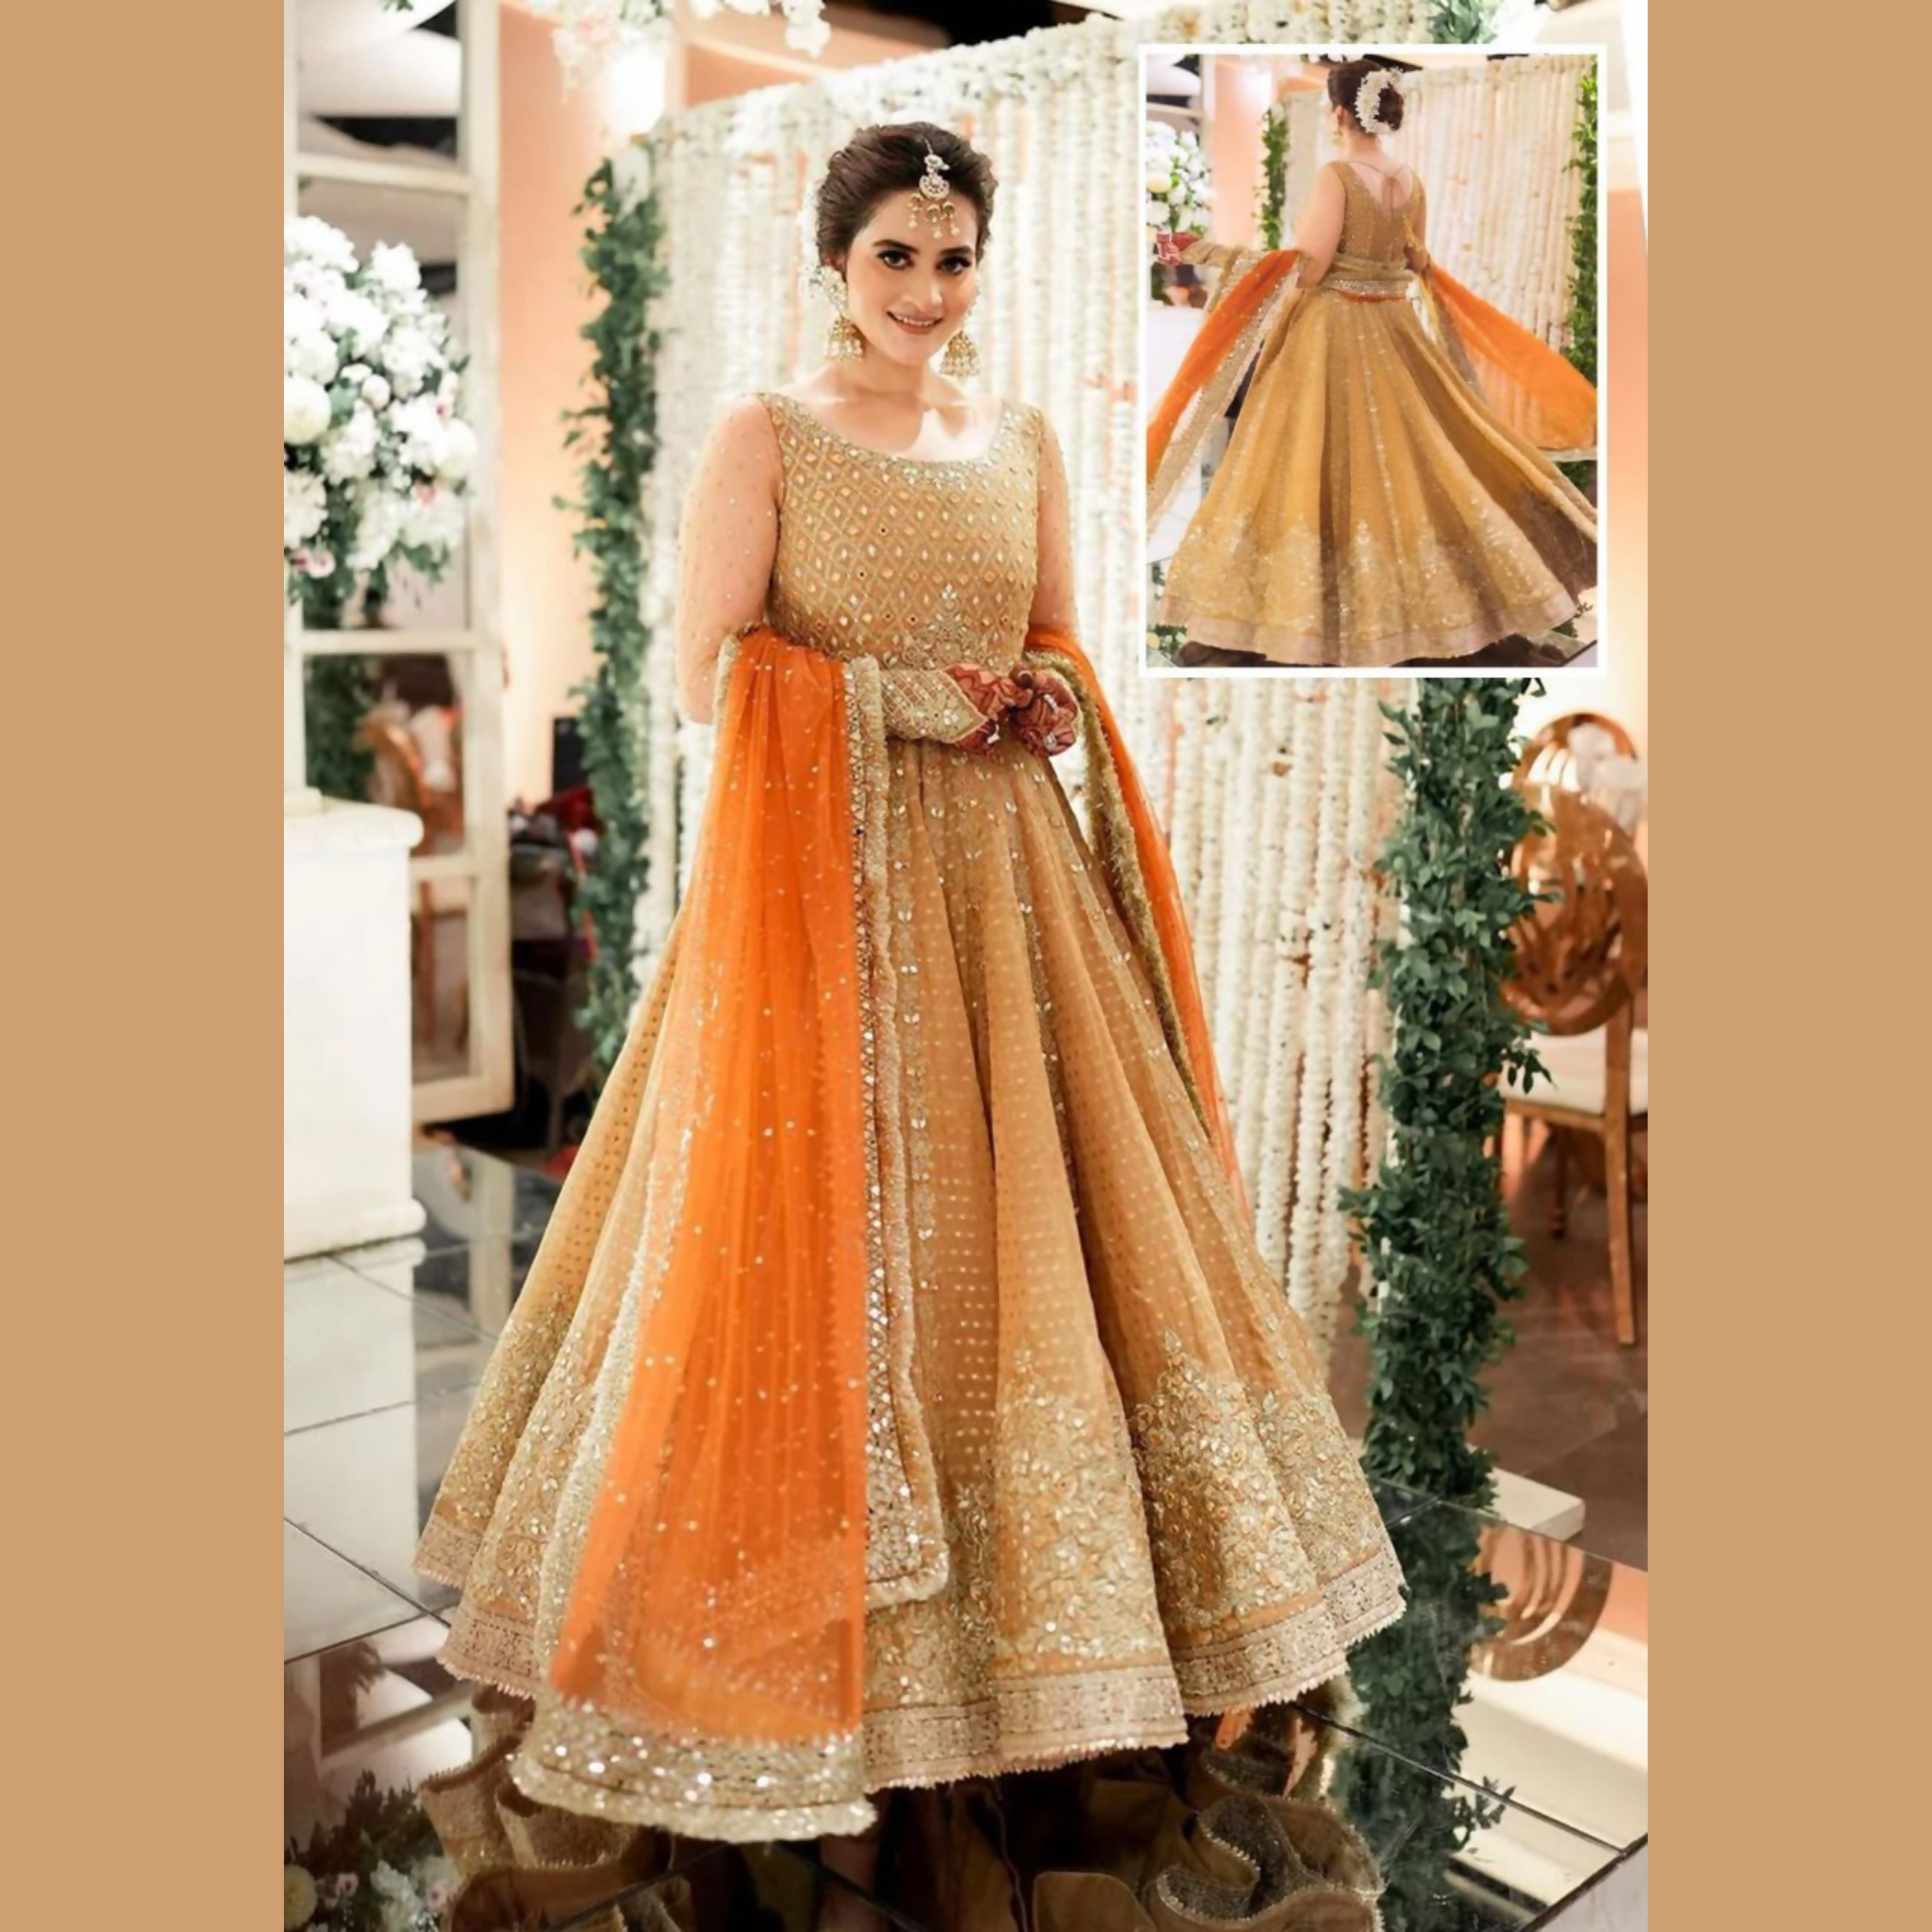 Unstitched Suit, Exquisite Maxi Wear, Full Long Frock with Heavy Embroidery, for Ladies